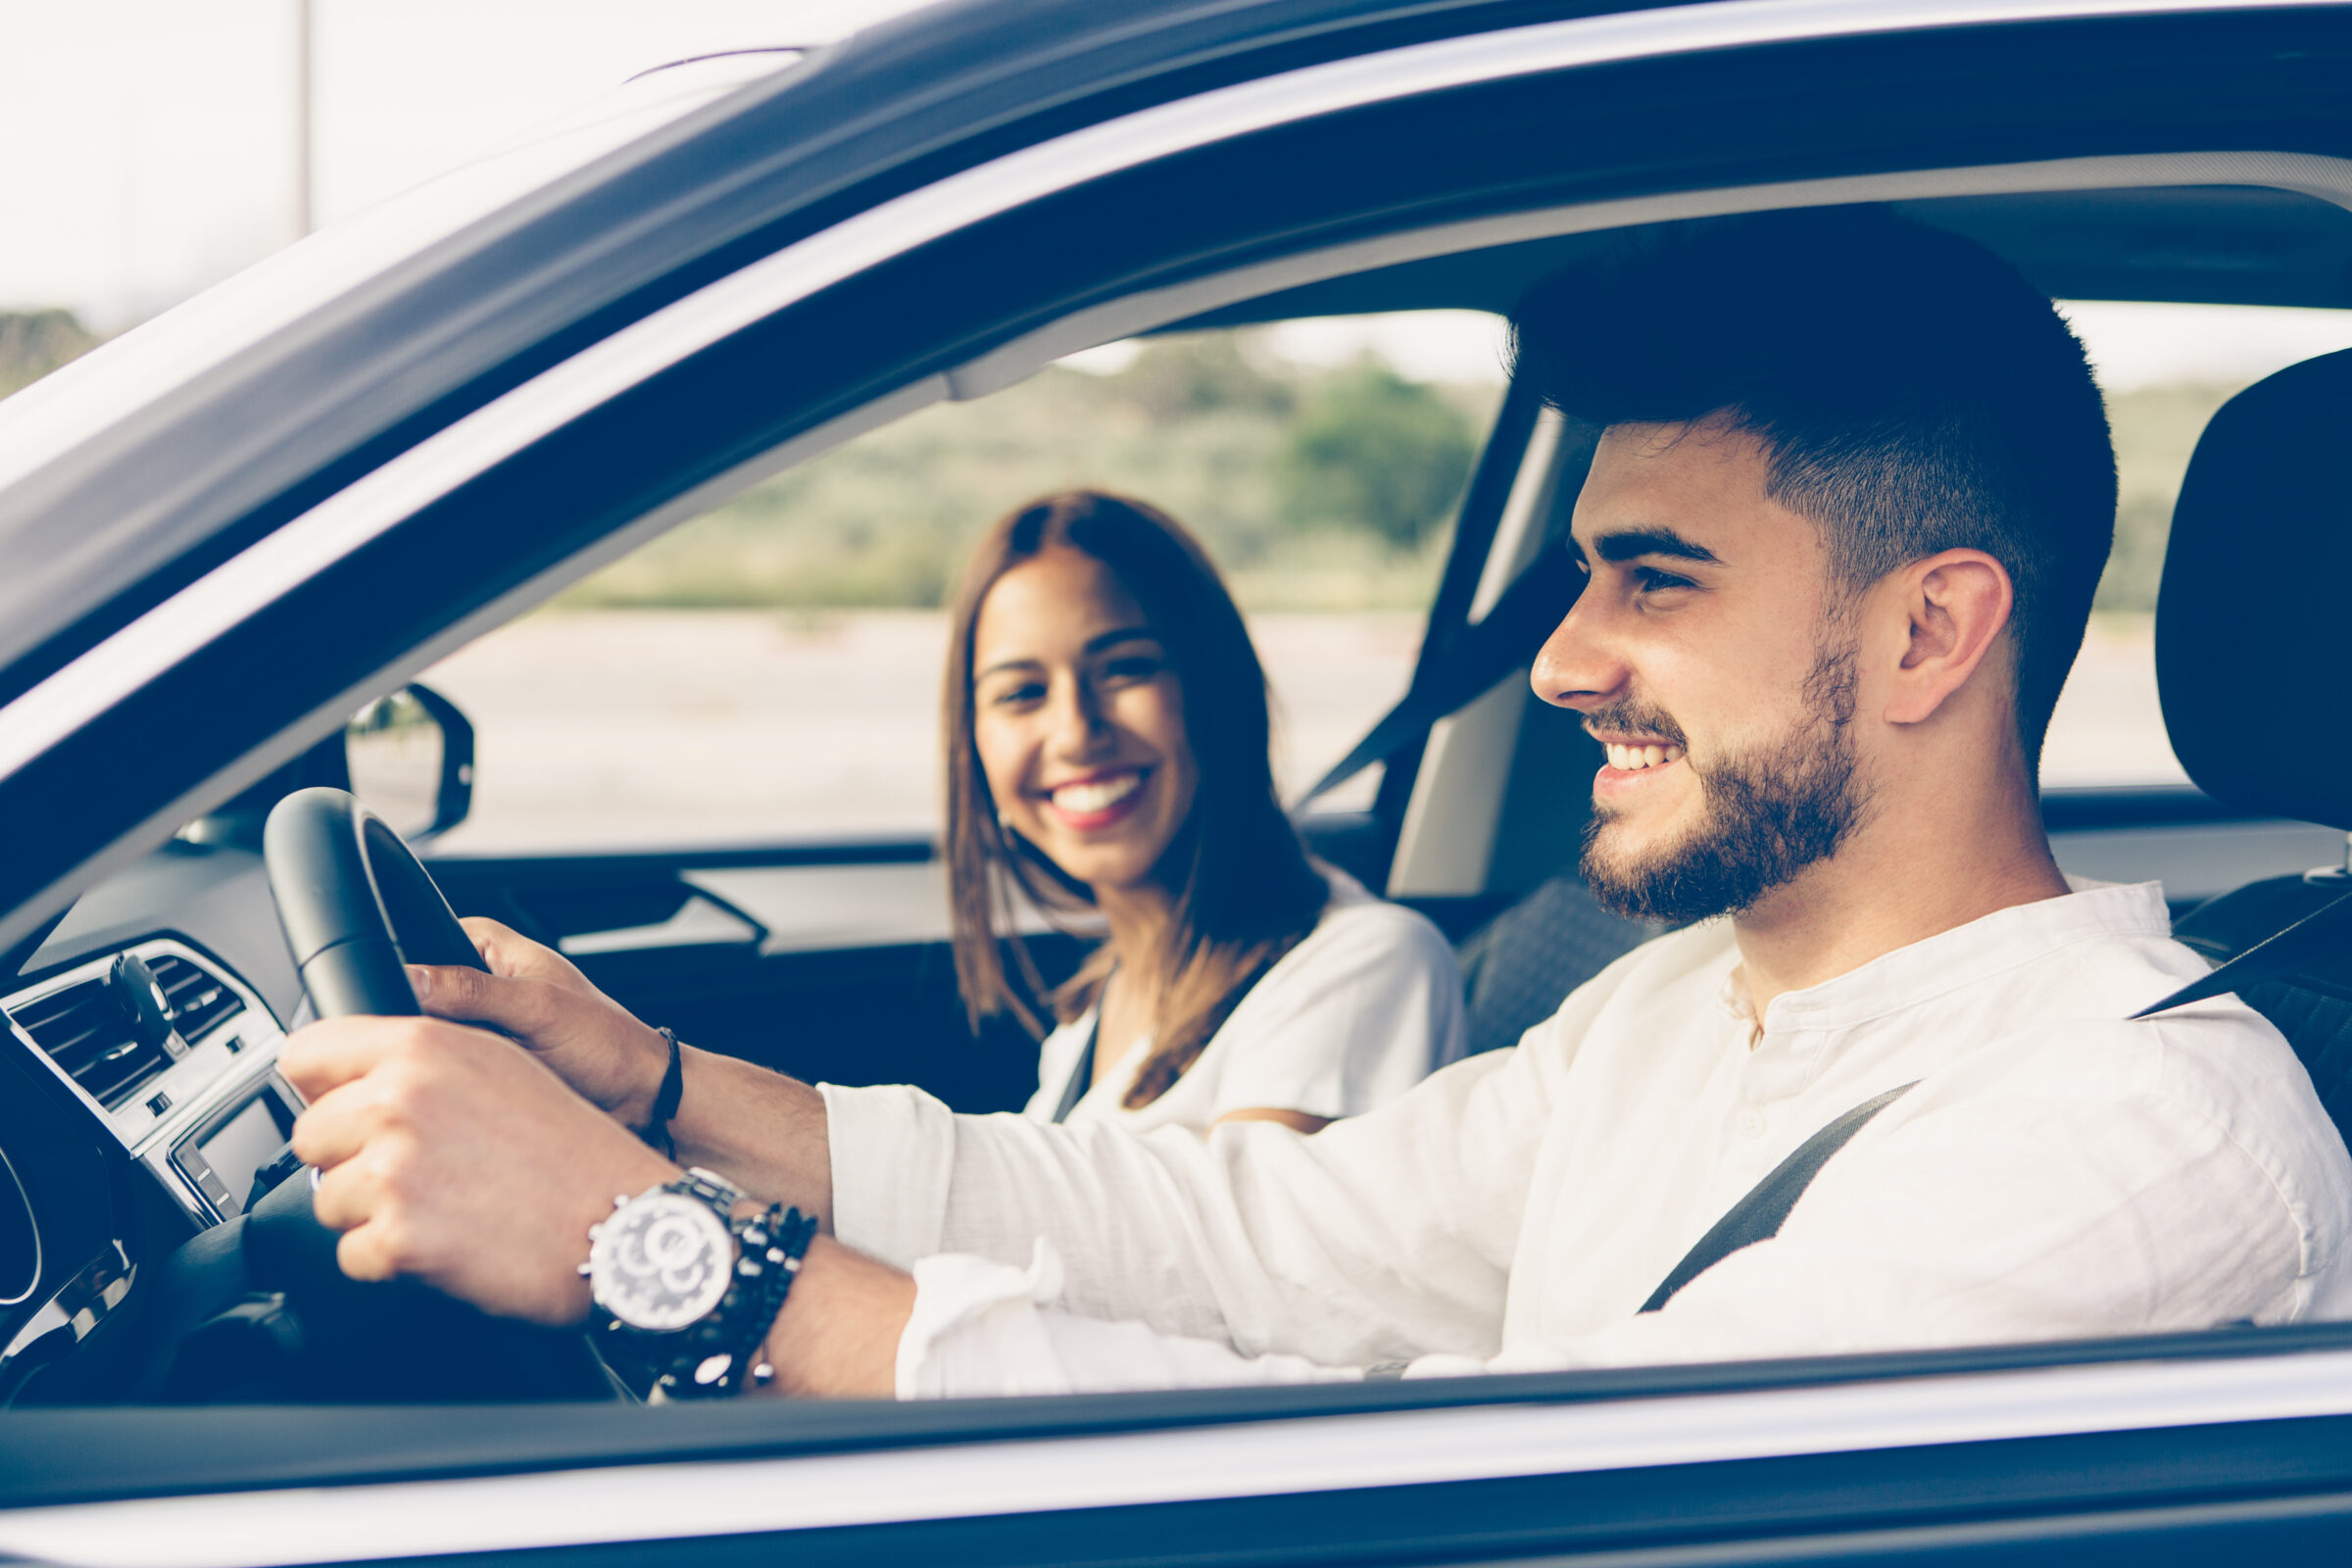 Profile of a happy man driving a car and woman sitting in passenger seat smiling